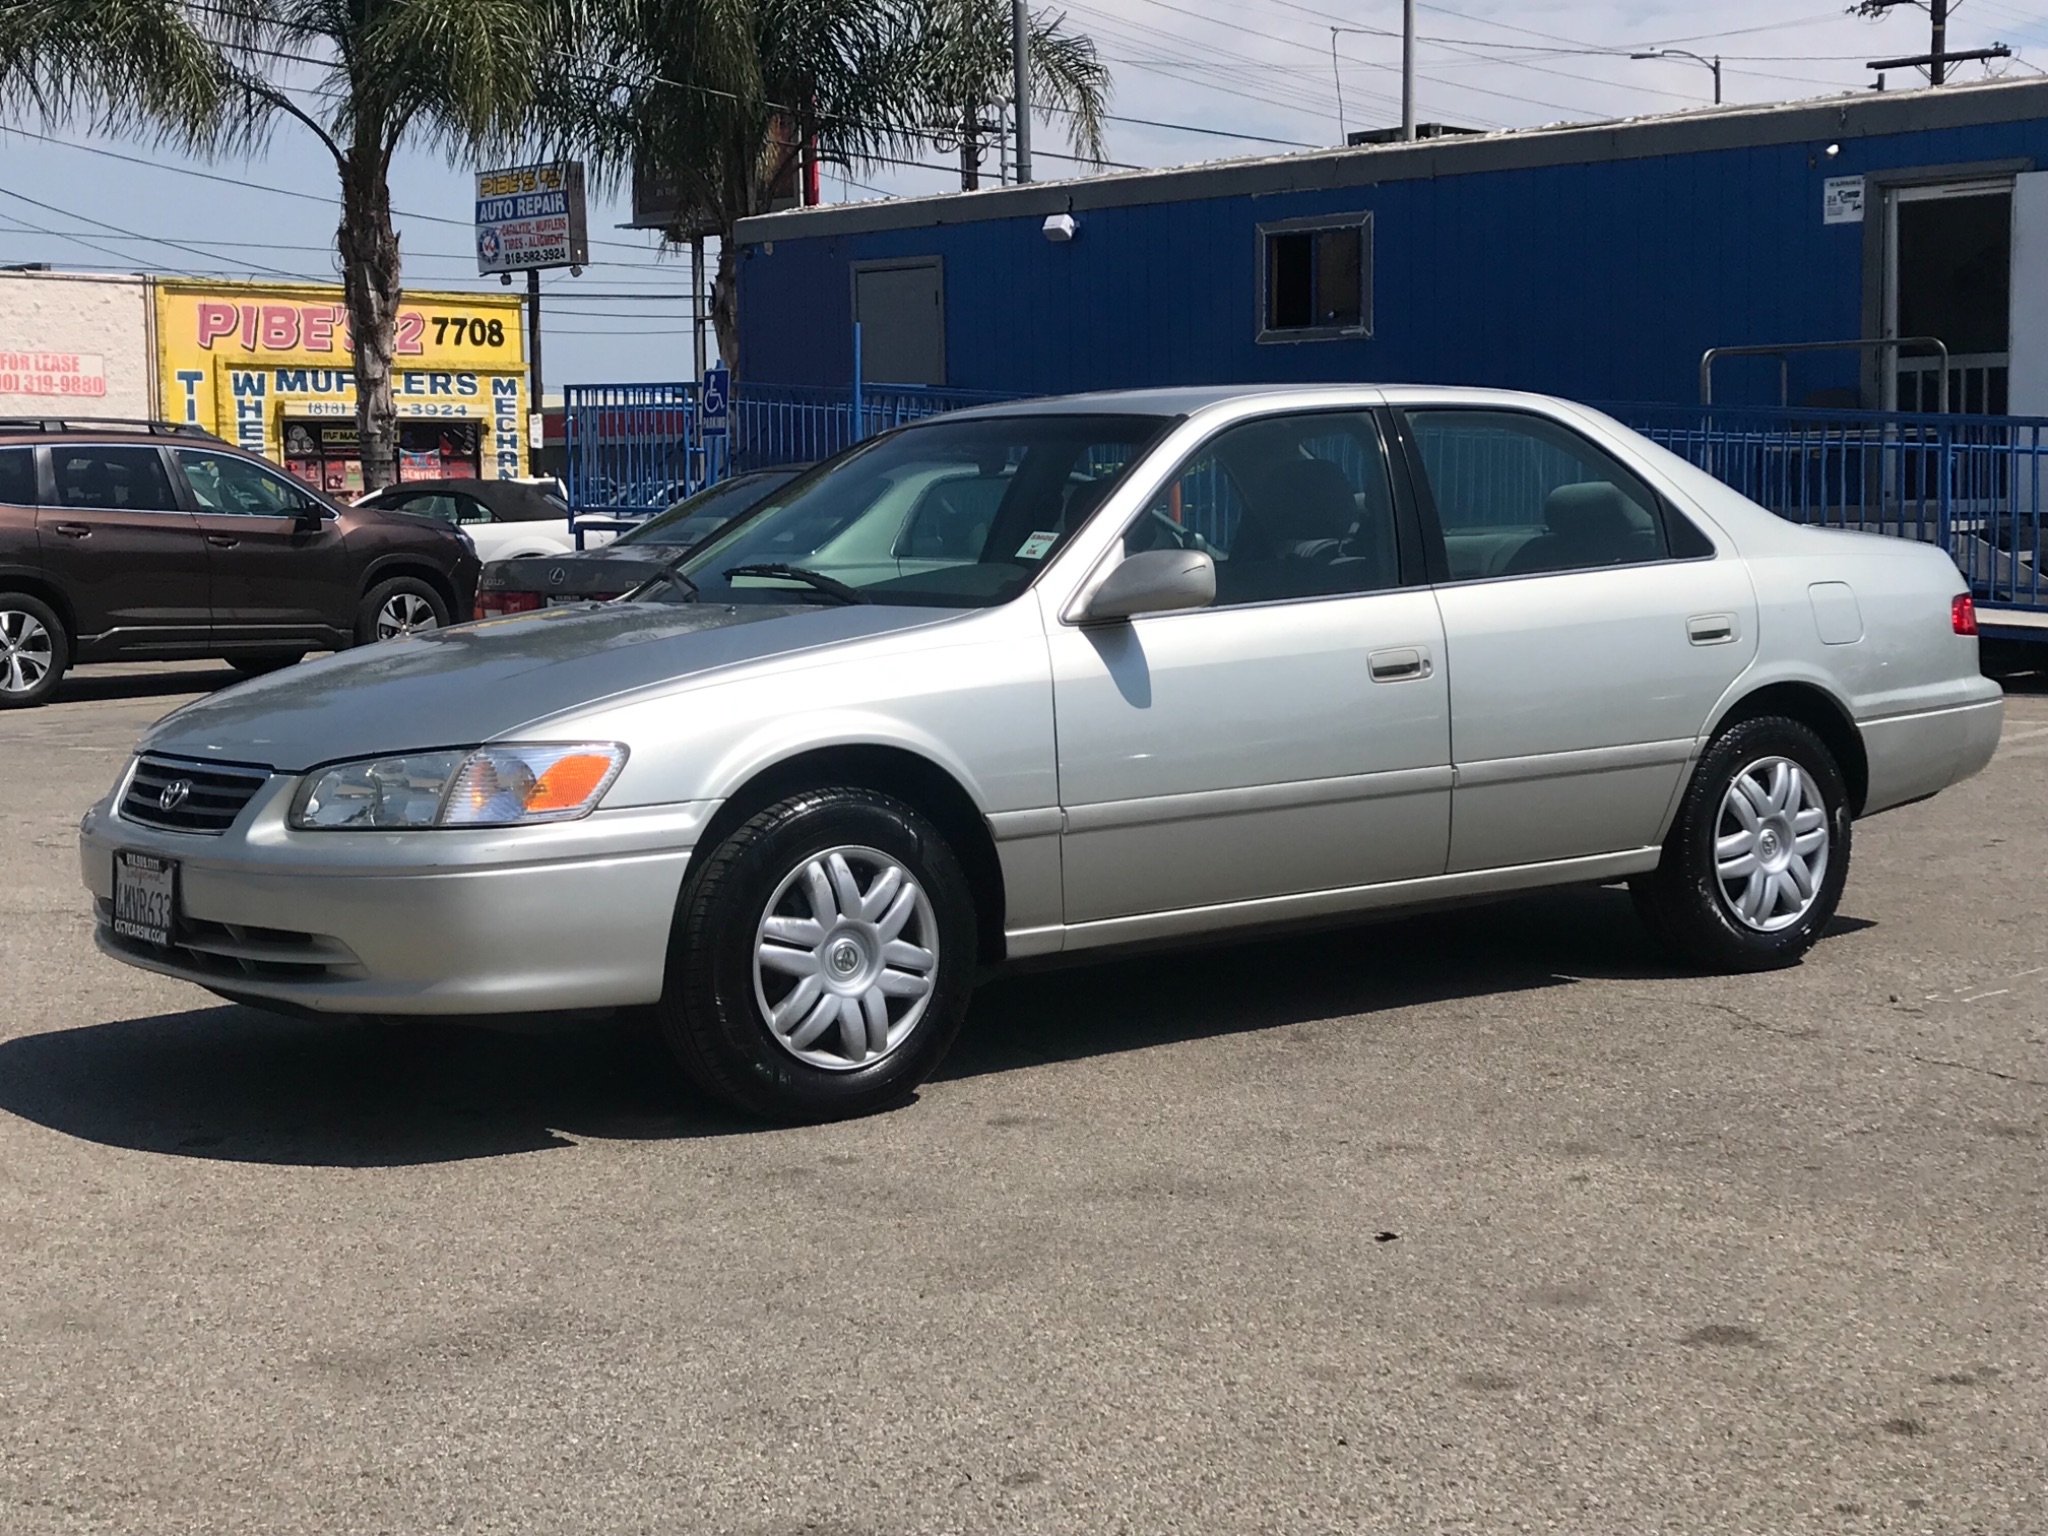 Used 2000 Toyota Camry LE at City Cars Warehouse Inc